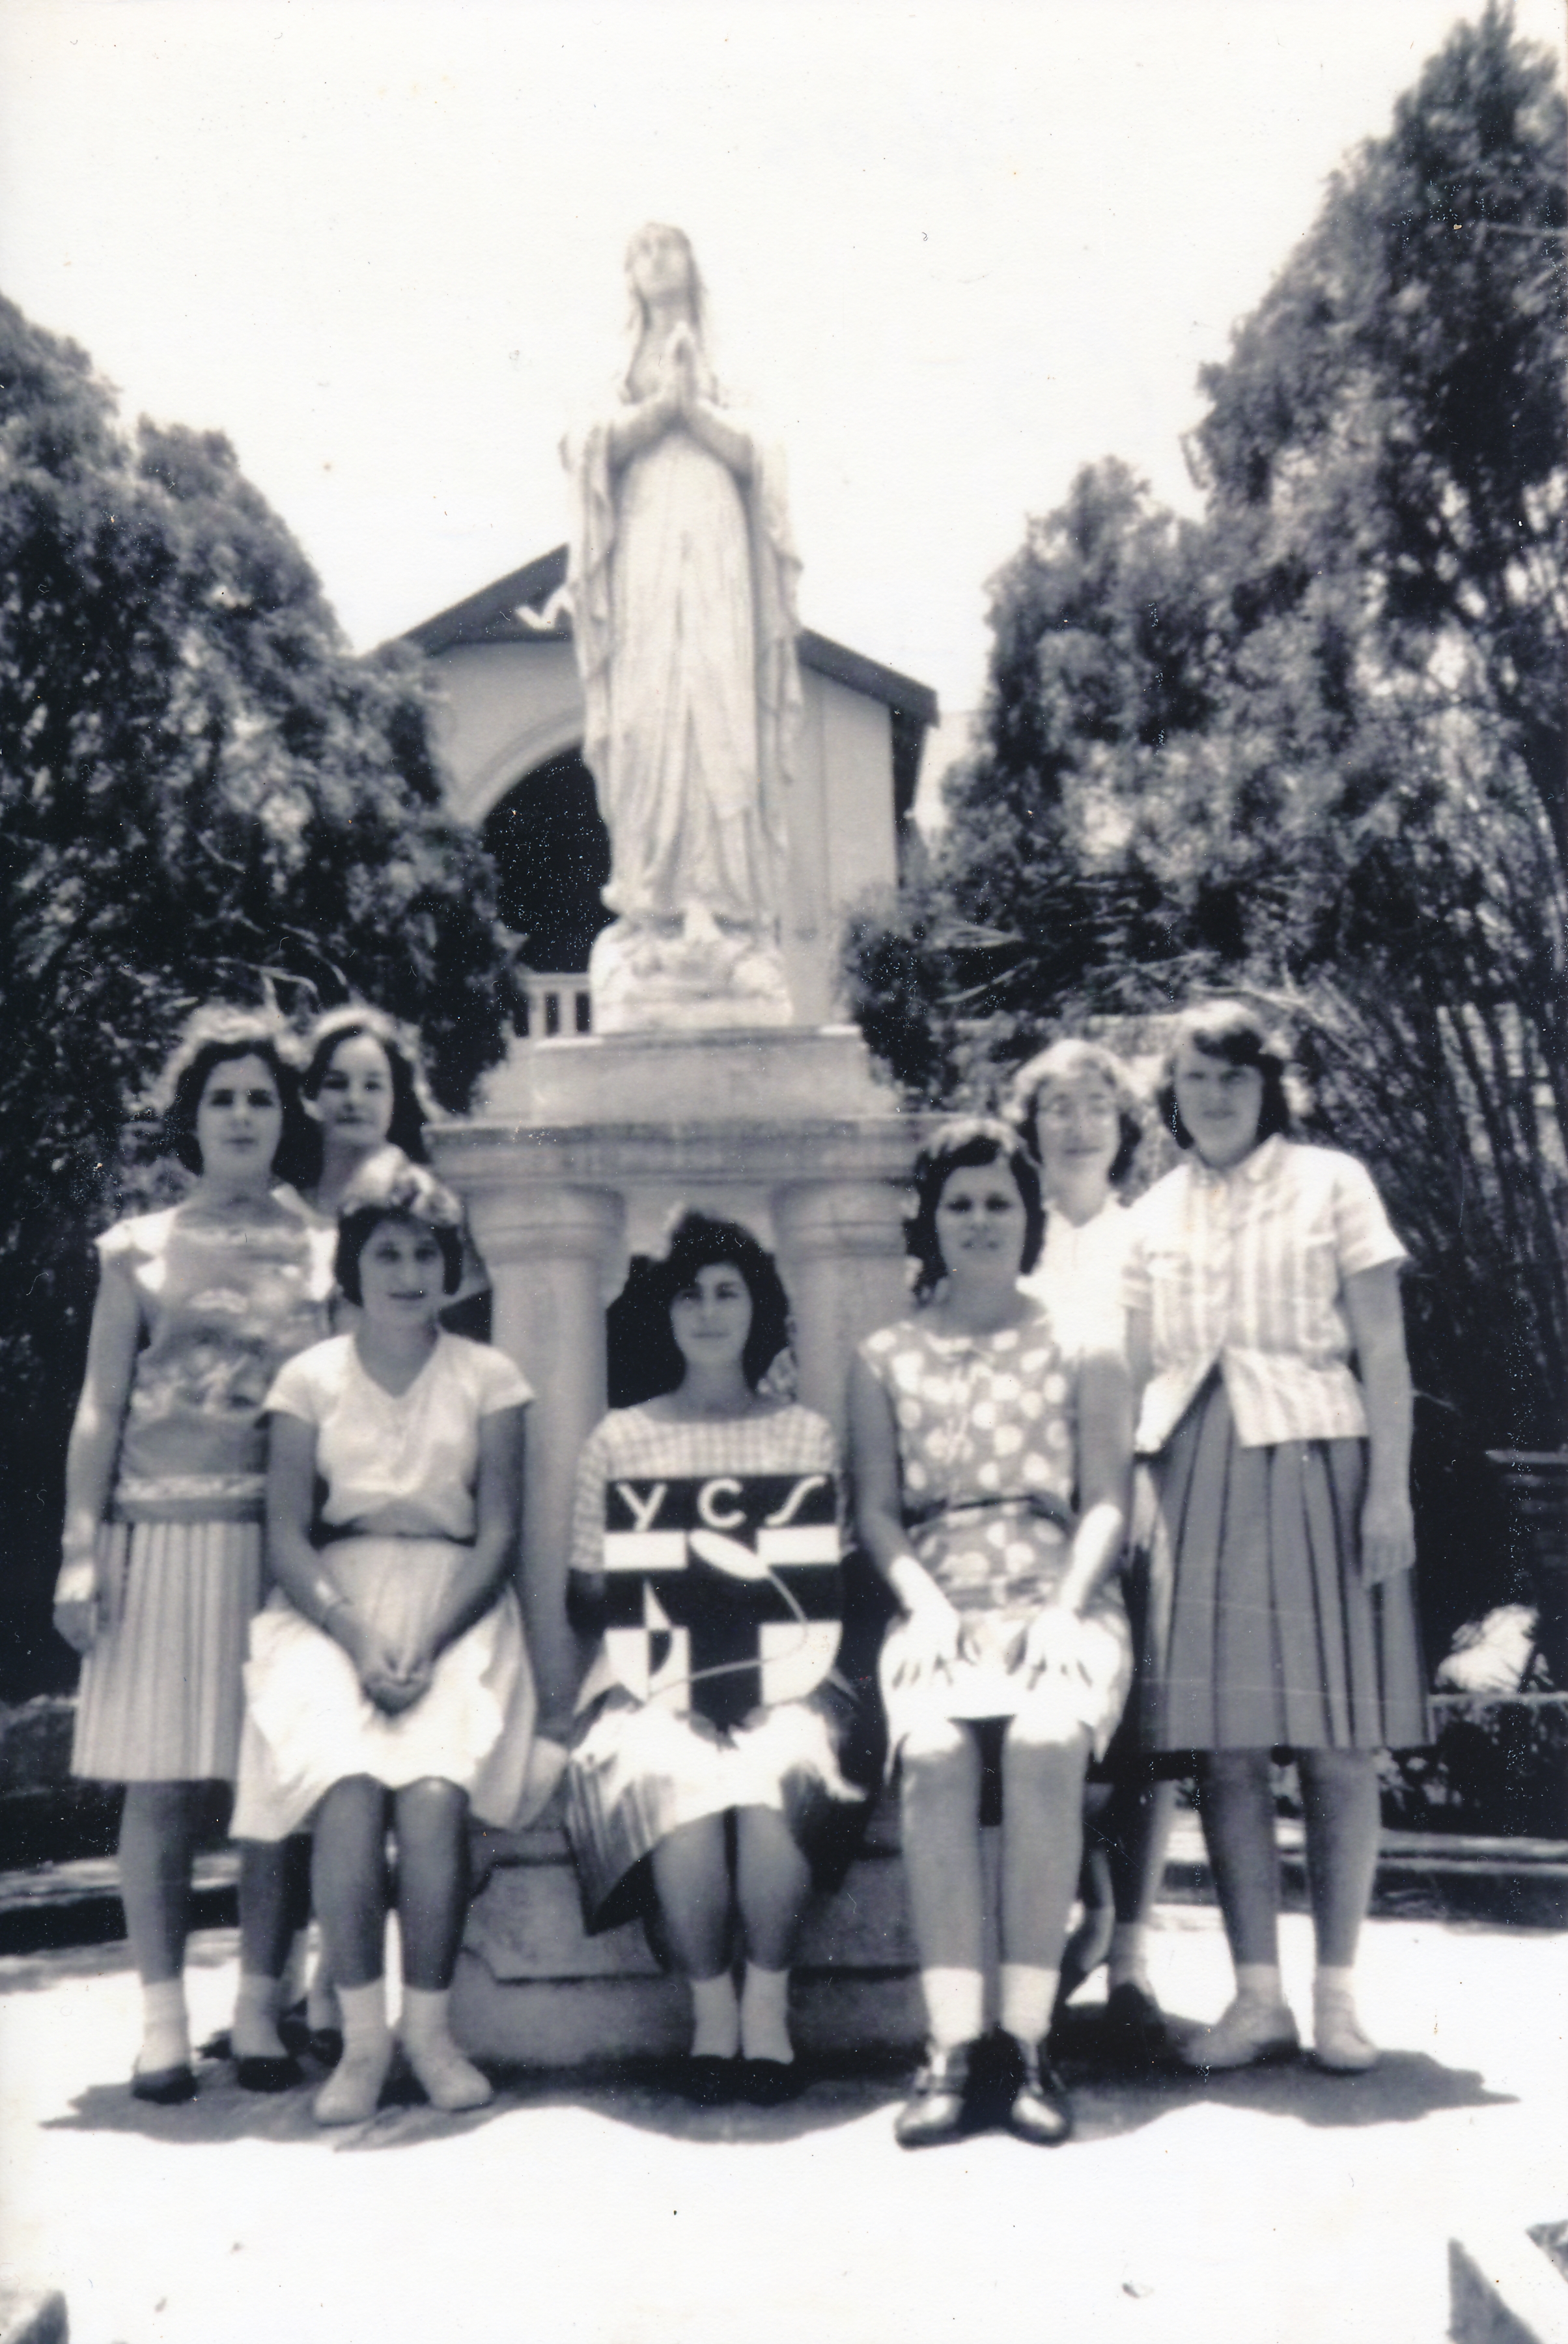 1964 YCS Girls in front of Our Lady